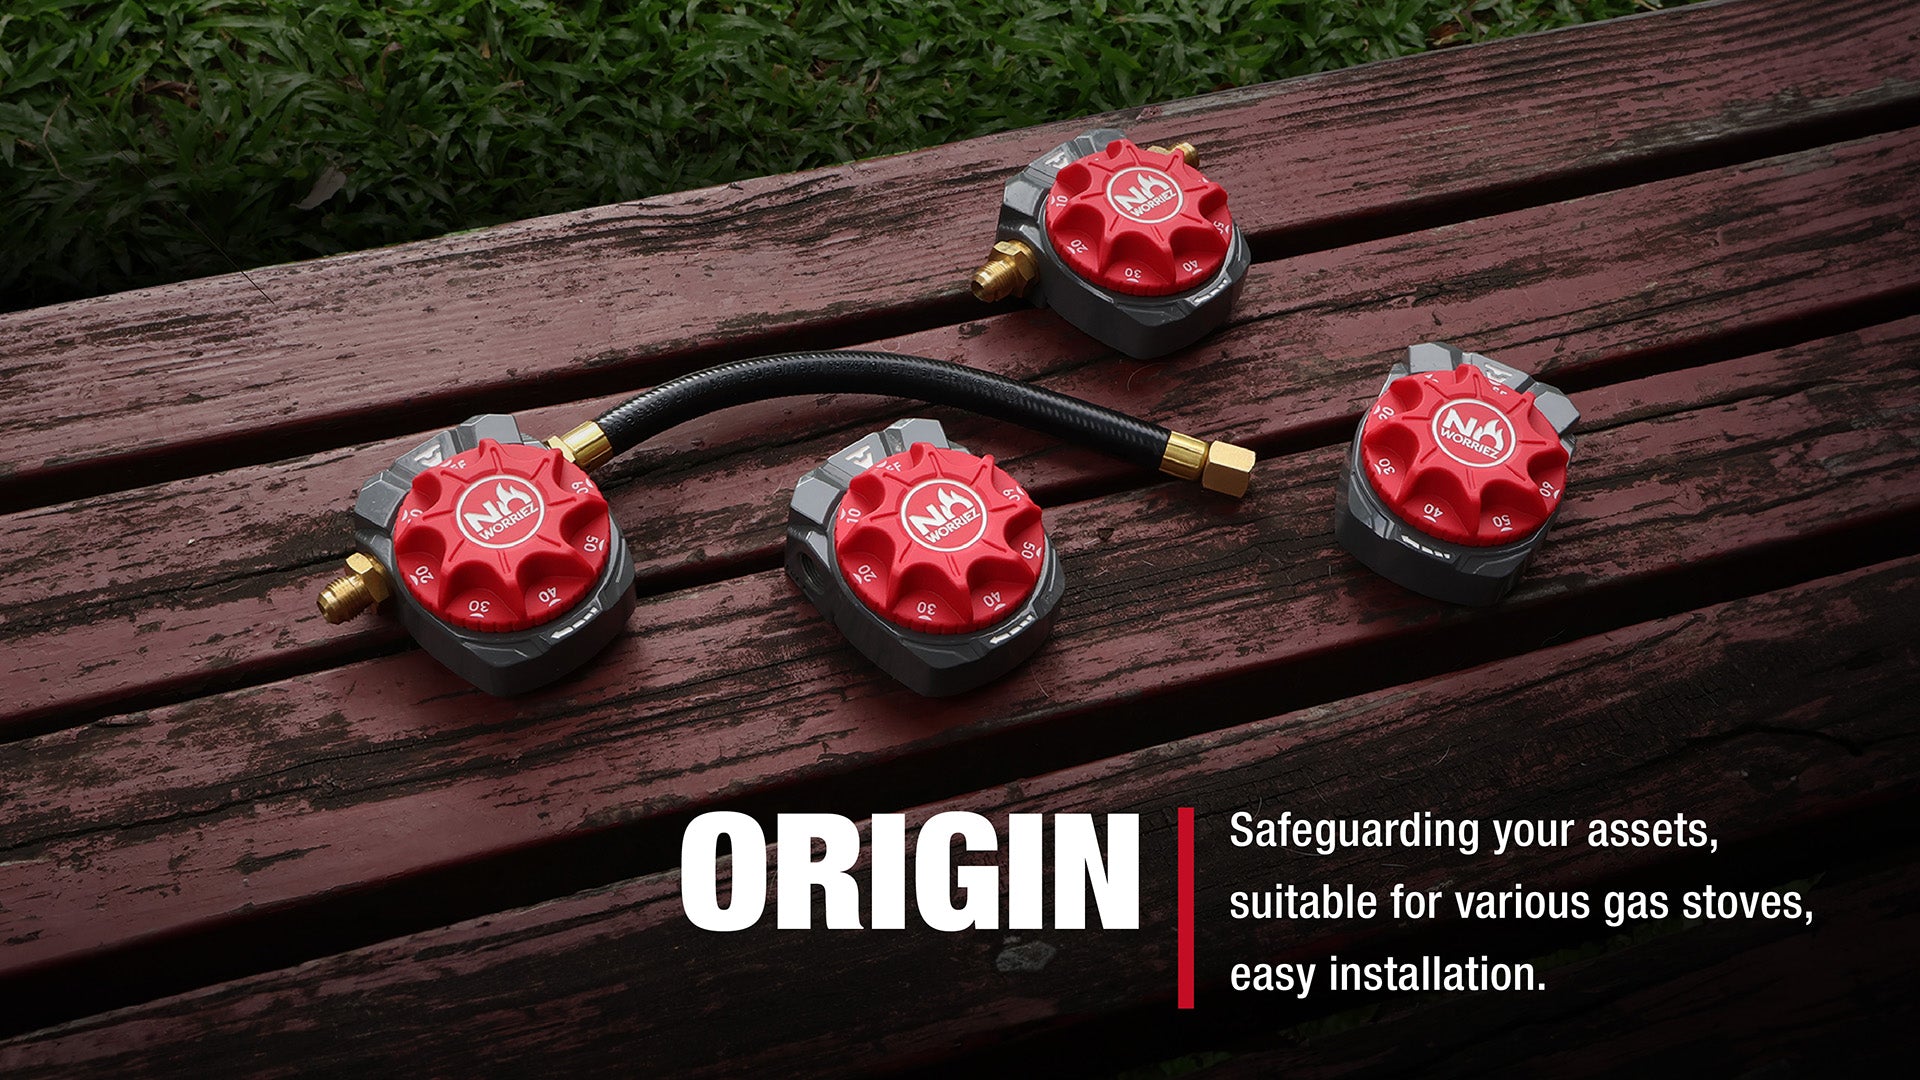 No Worriez Origin series safeguarding your assets suitable for various gas stoves easy installation